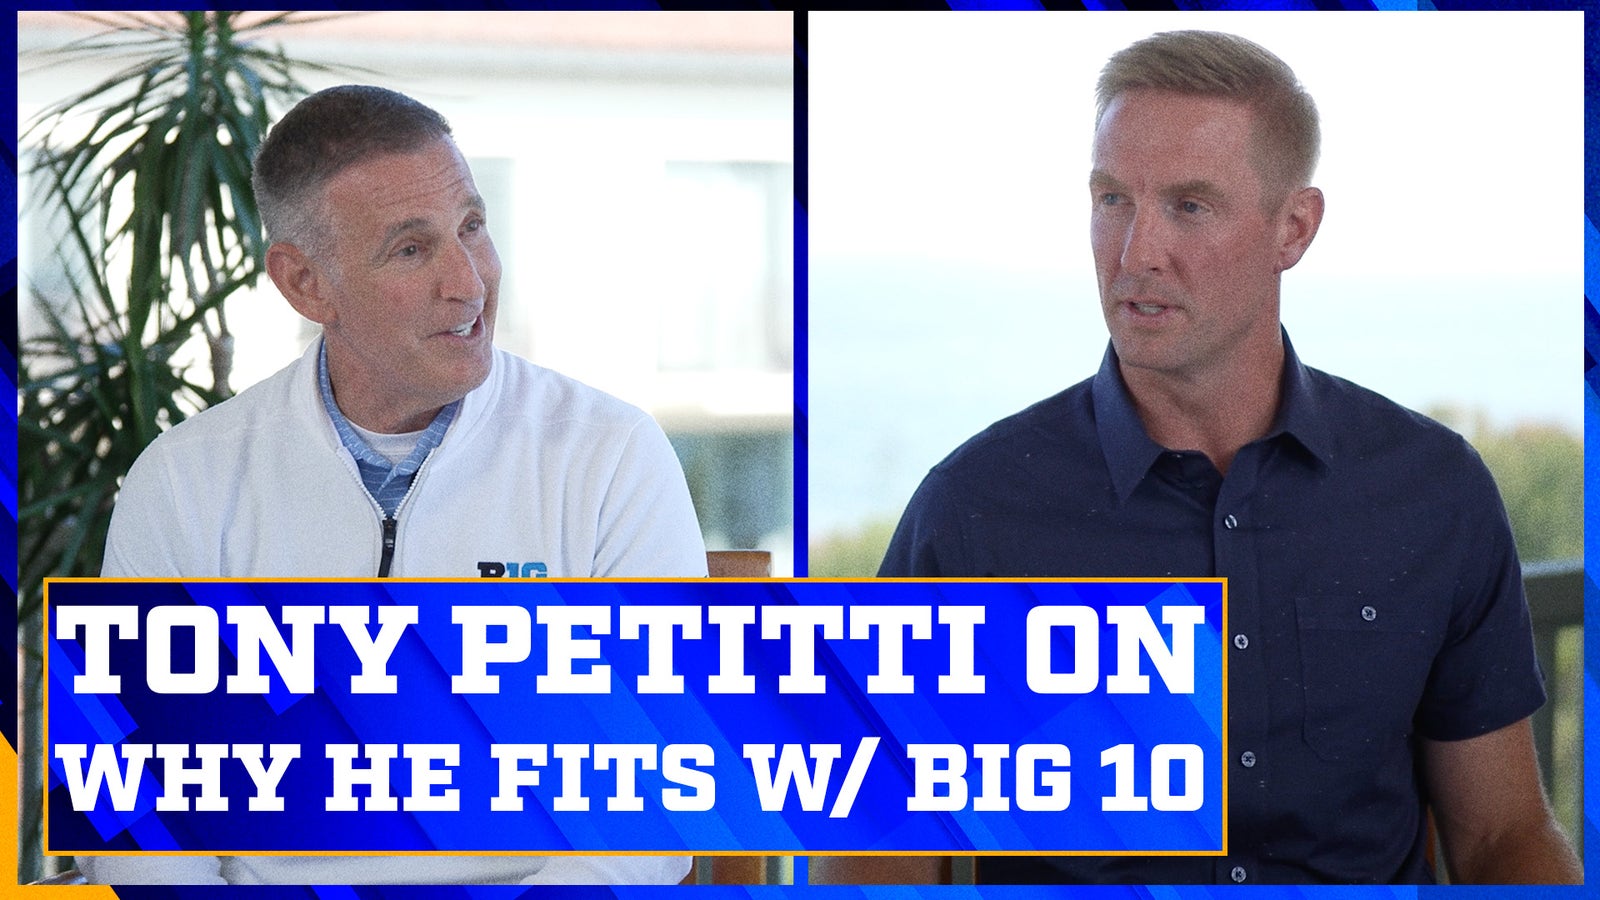 Tony Petitti on how his background prepared him to be Big Ten Commissioner